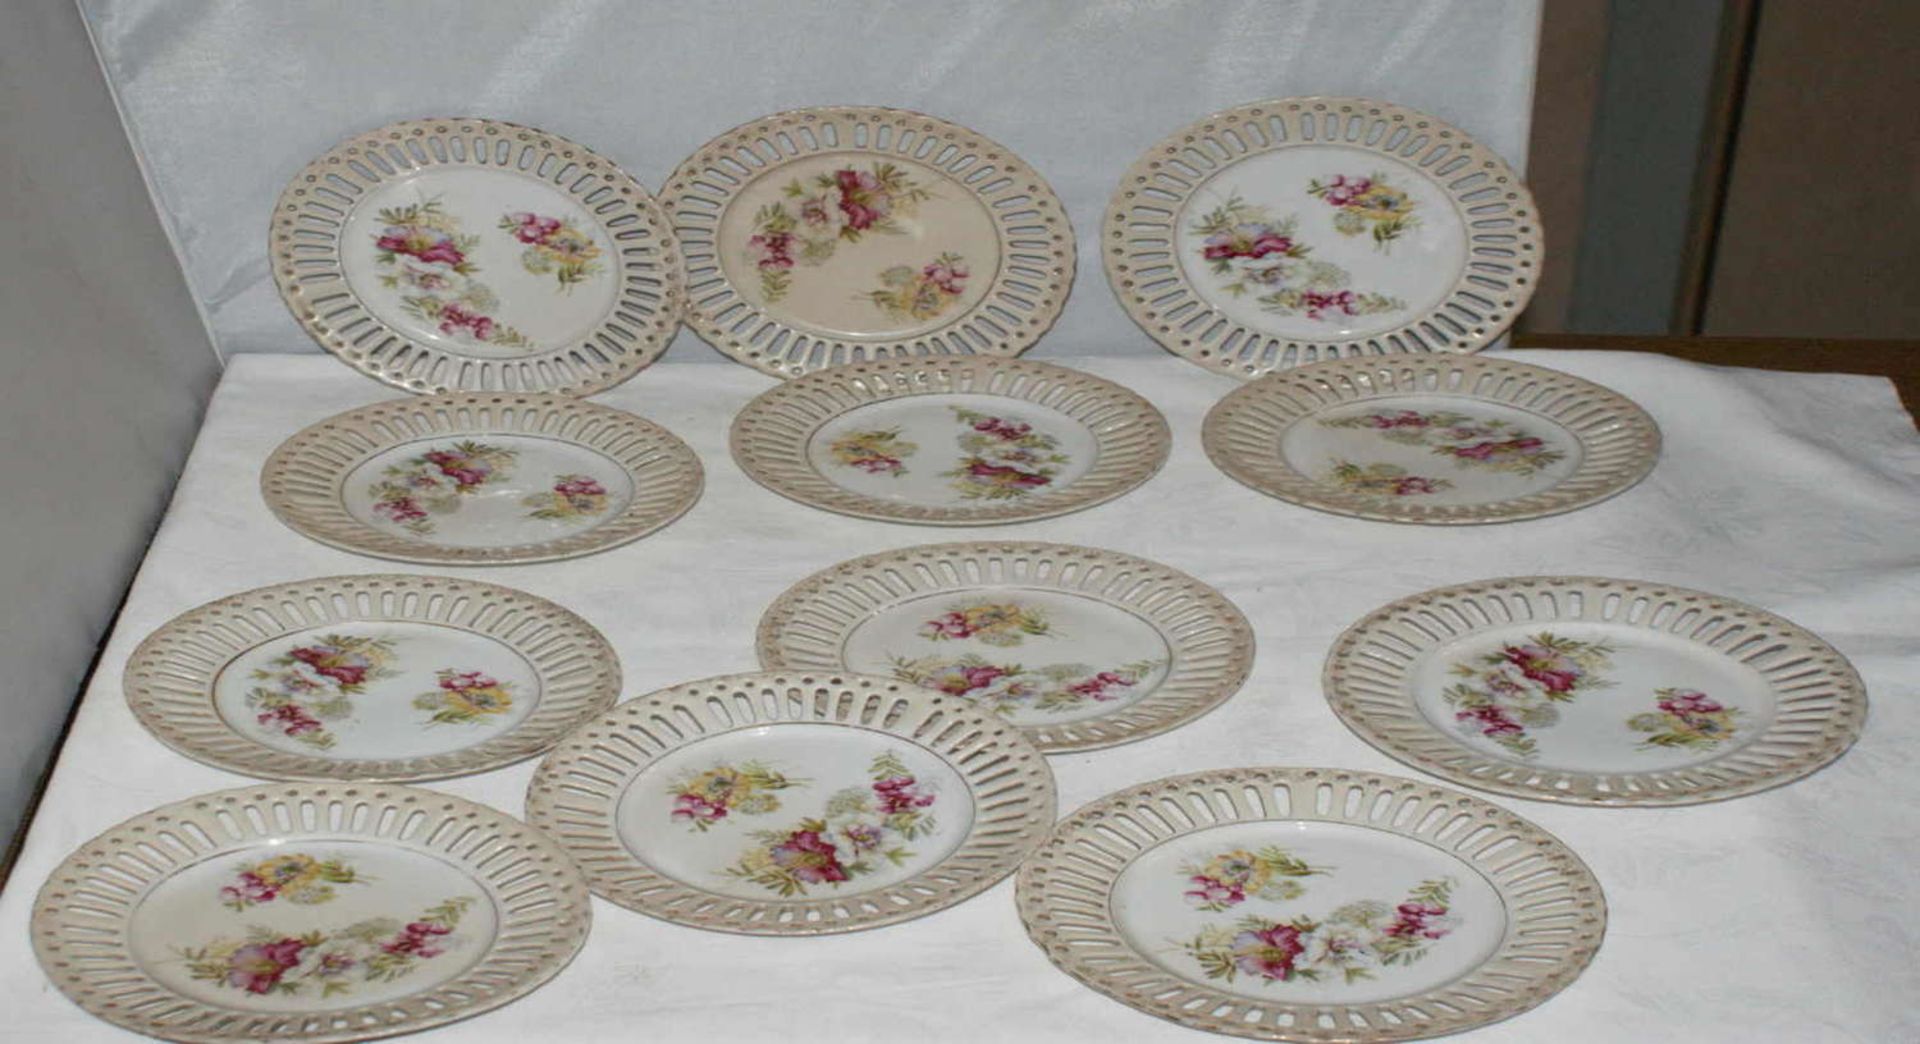 Porcelain, 12 breakthrough plates around 1920 with floral repurposed decoration.